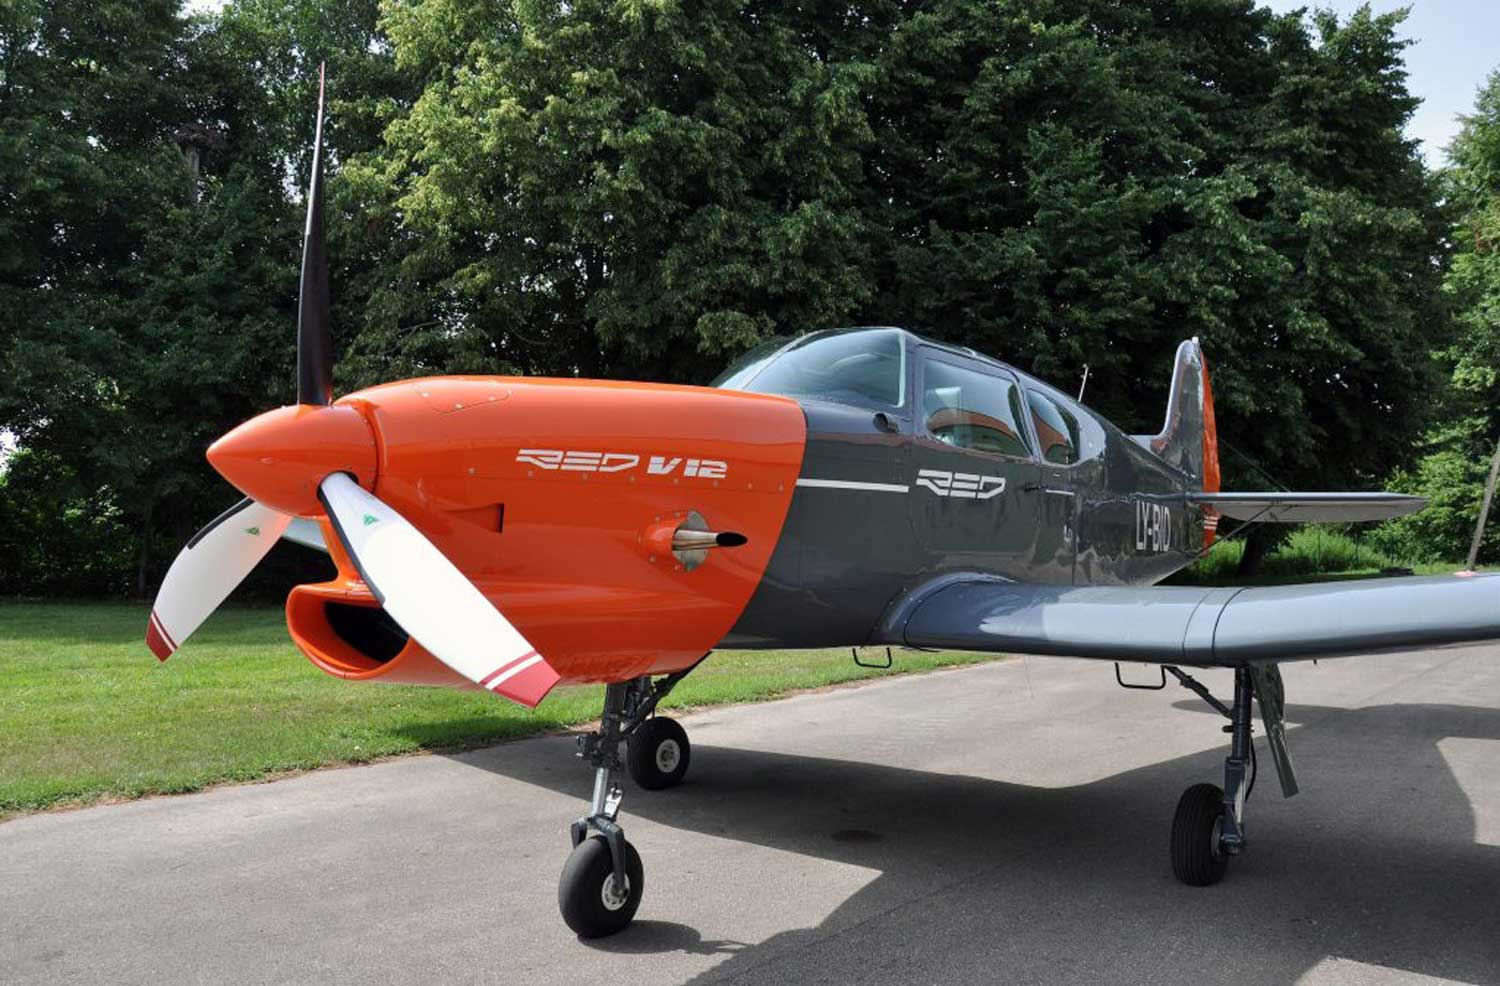 RED Yak 18T